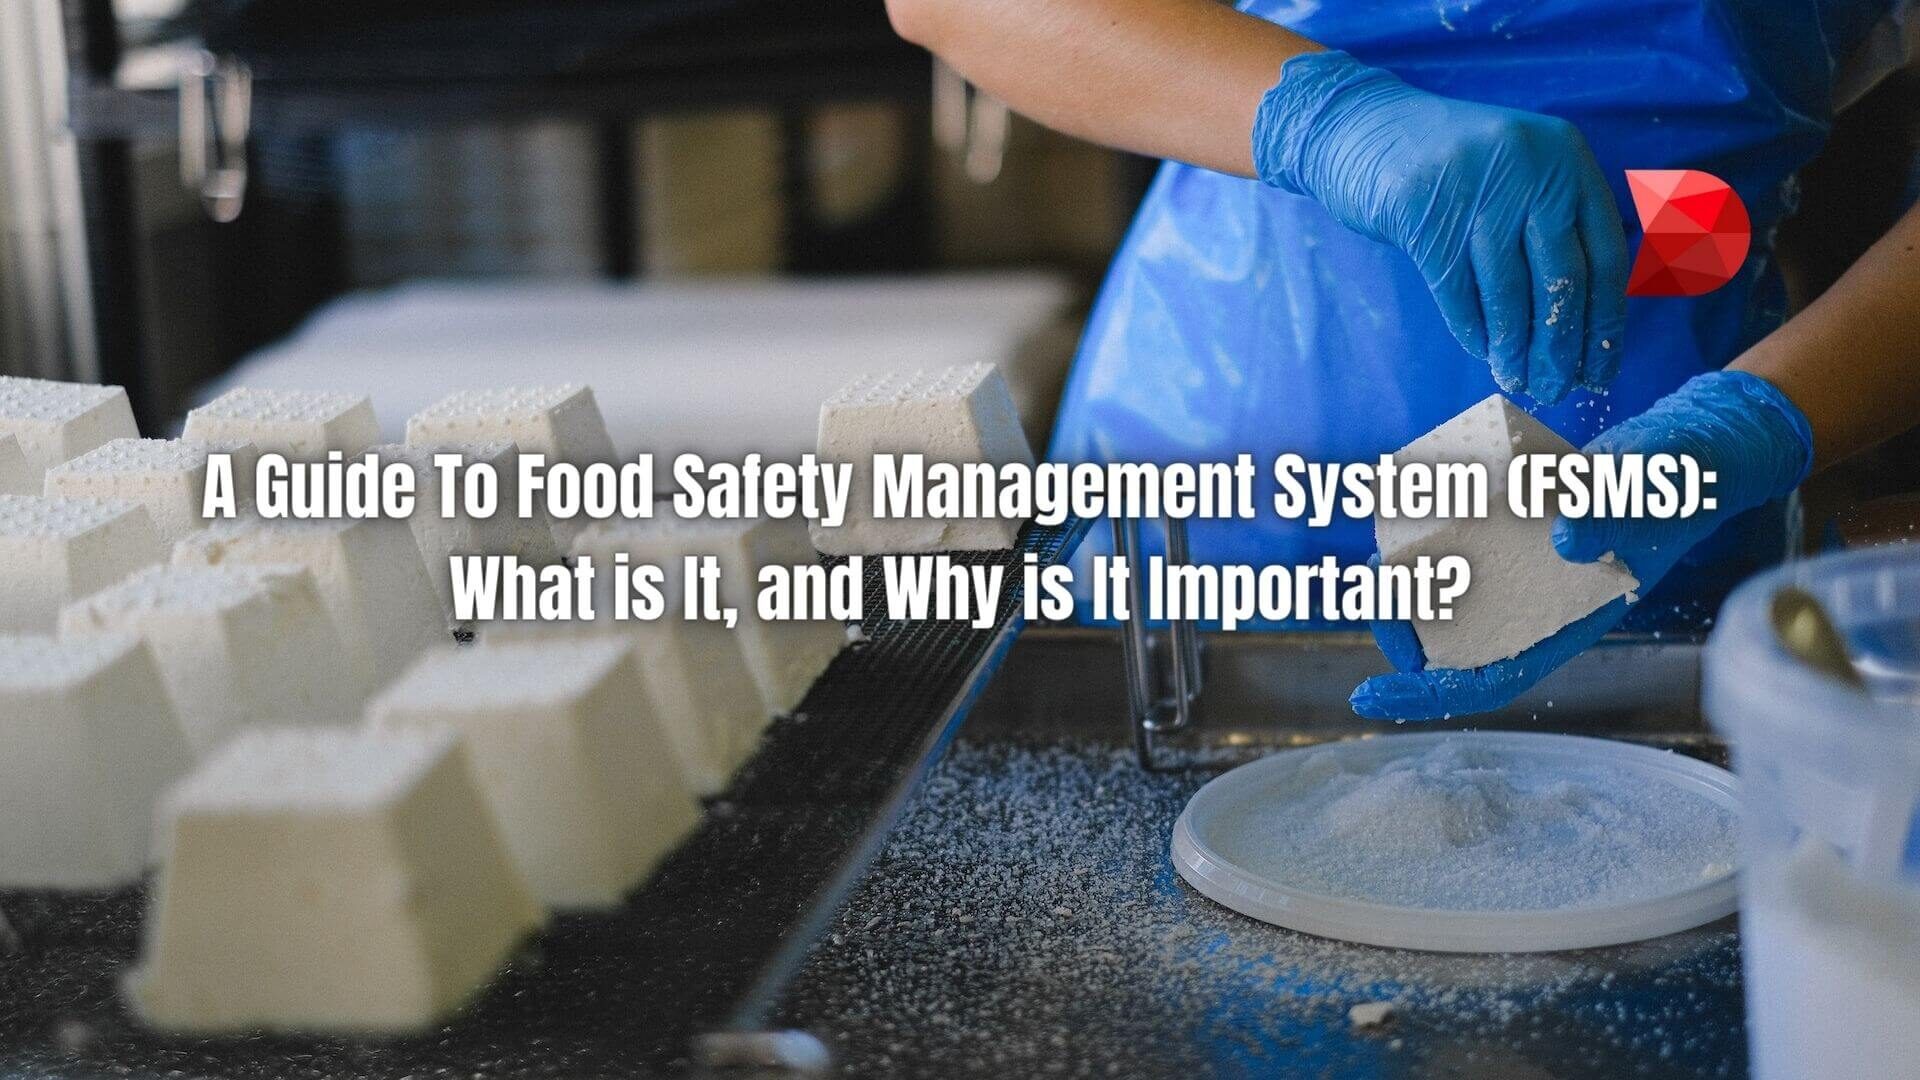 This article will discuss what a food safety management system (FSMS) is and why it's so important for food businesses. Learn more!